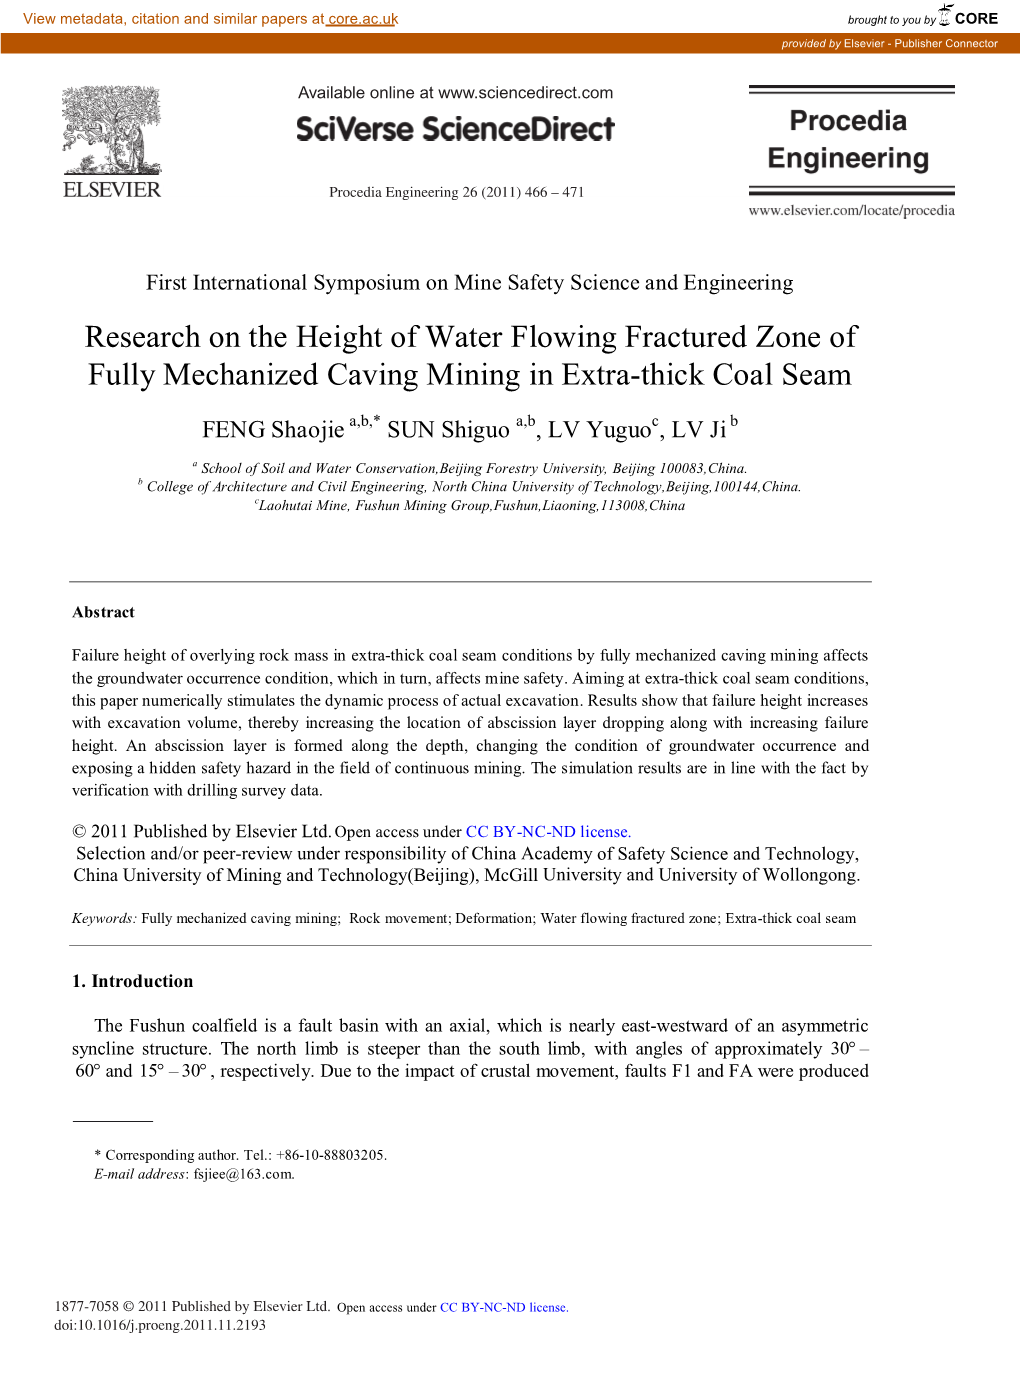 Research on the Height of Water Flowing Fractured Zone of Fully Mechanized Caving Mining in Extra-Thick Coal Seam